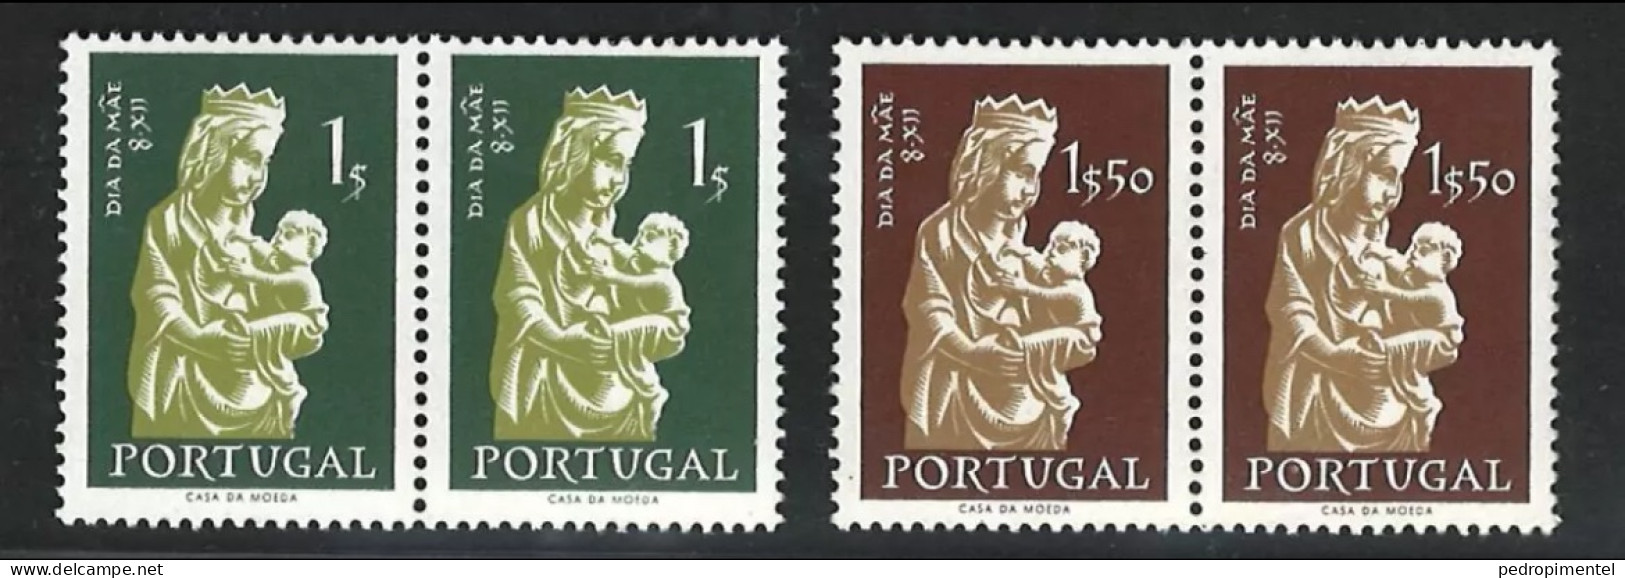 Portugal Stamps 1956 "Mothers Day" Condition MNH #825-826 (Pair) - Unused Stamps